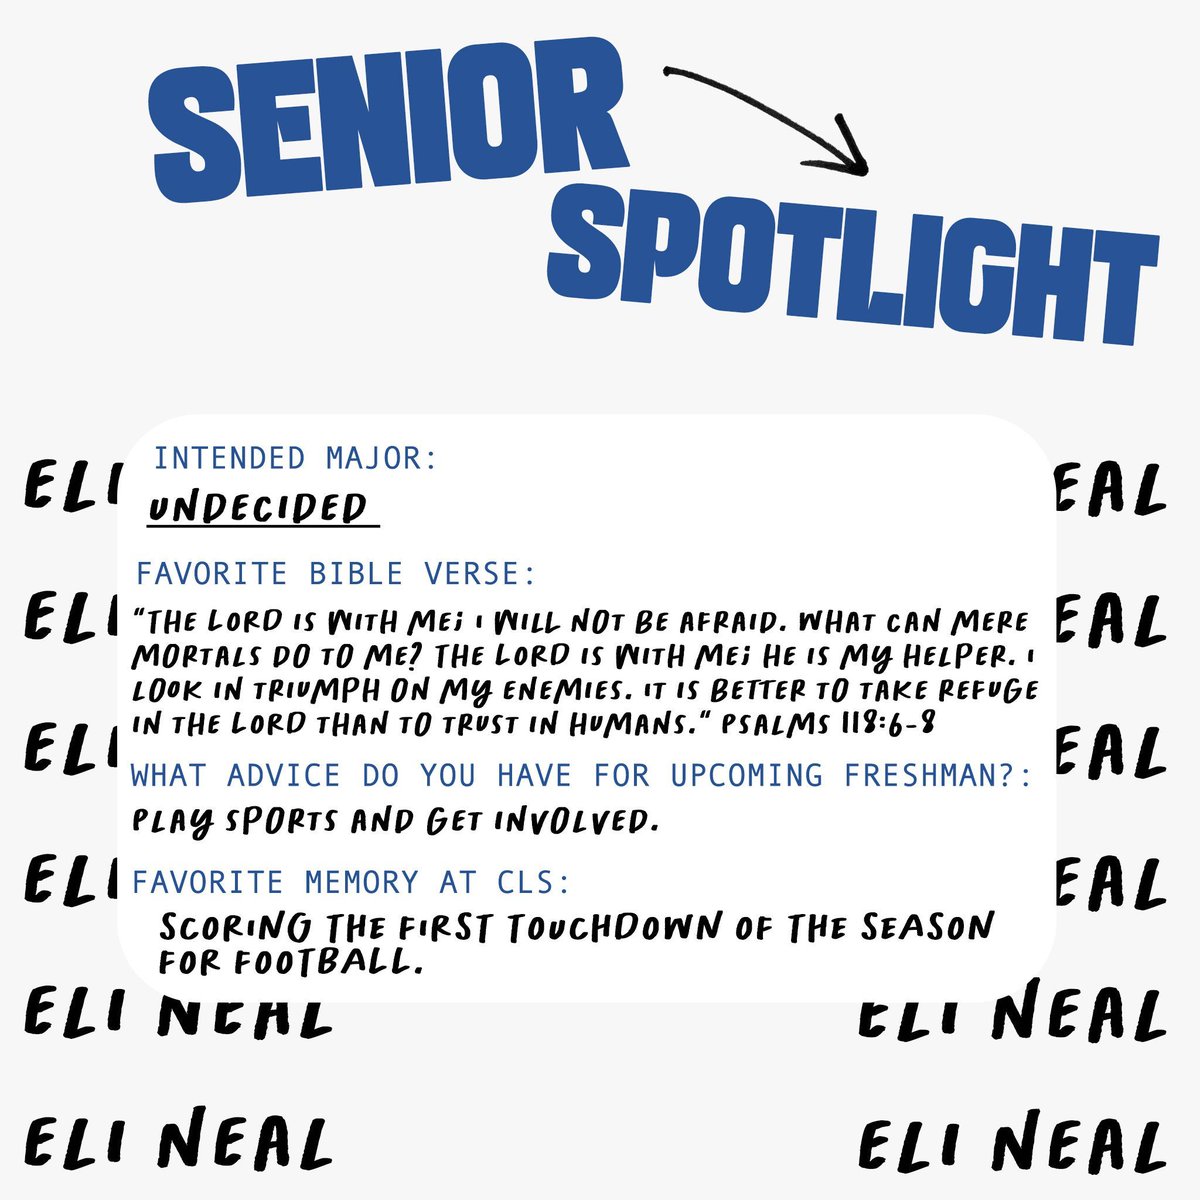 Eli Neal: A beacon of confidence and drive. With an outgoing spirit and unstoppable motivation, he's not just chasing dreams—he's catching them. He's a powerhouse athlete on the field, destined to shine at UW-Eau Claire, where his determination fuels his journey to greatness.